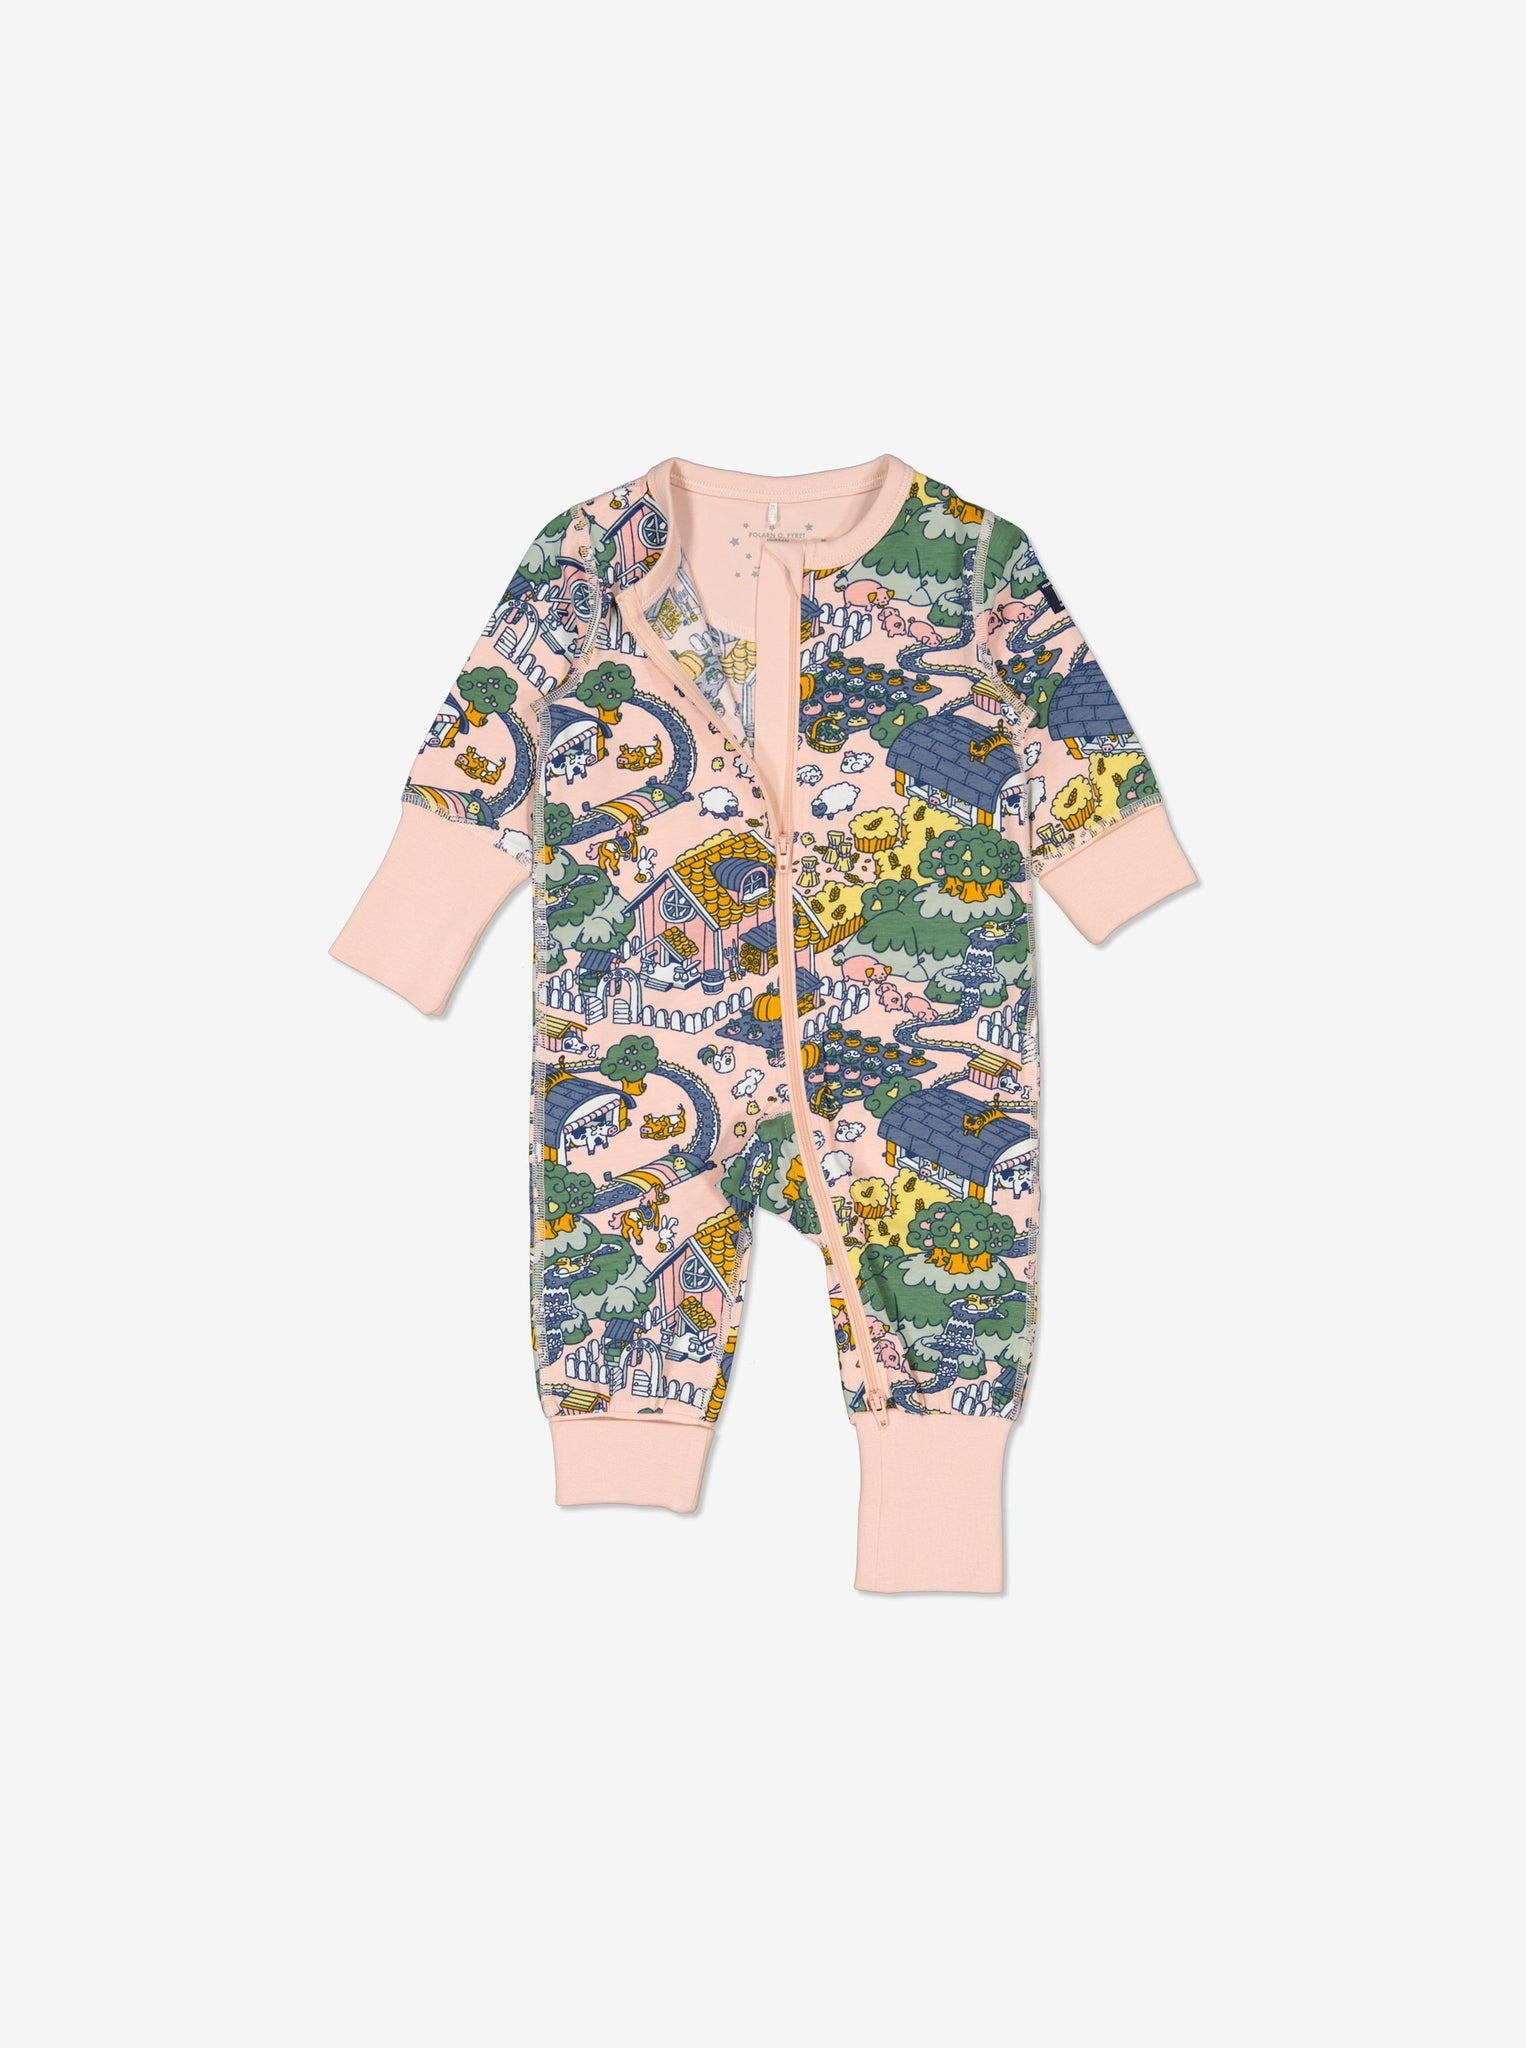  Organic Pink Baby Romper from Polarn O. Pyret Kidswear. Made from environmentally friendly materials.